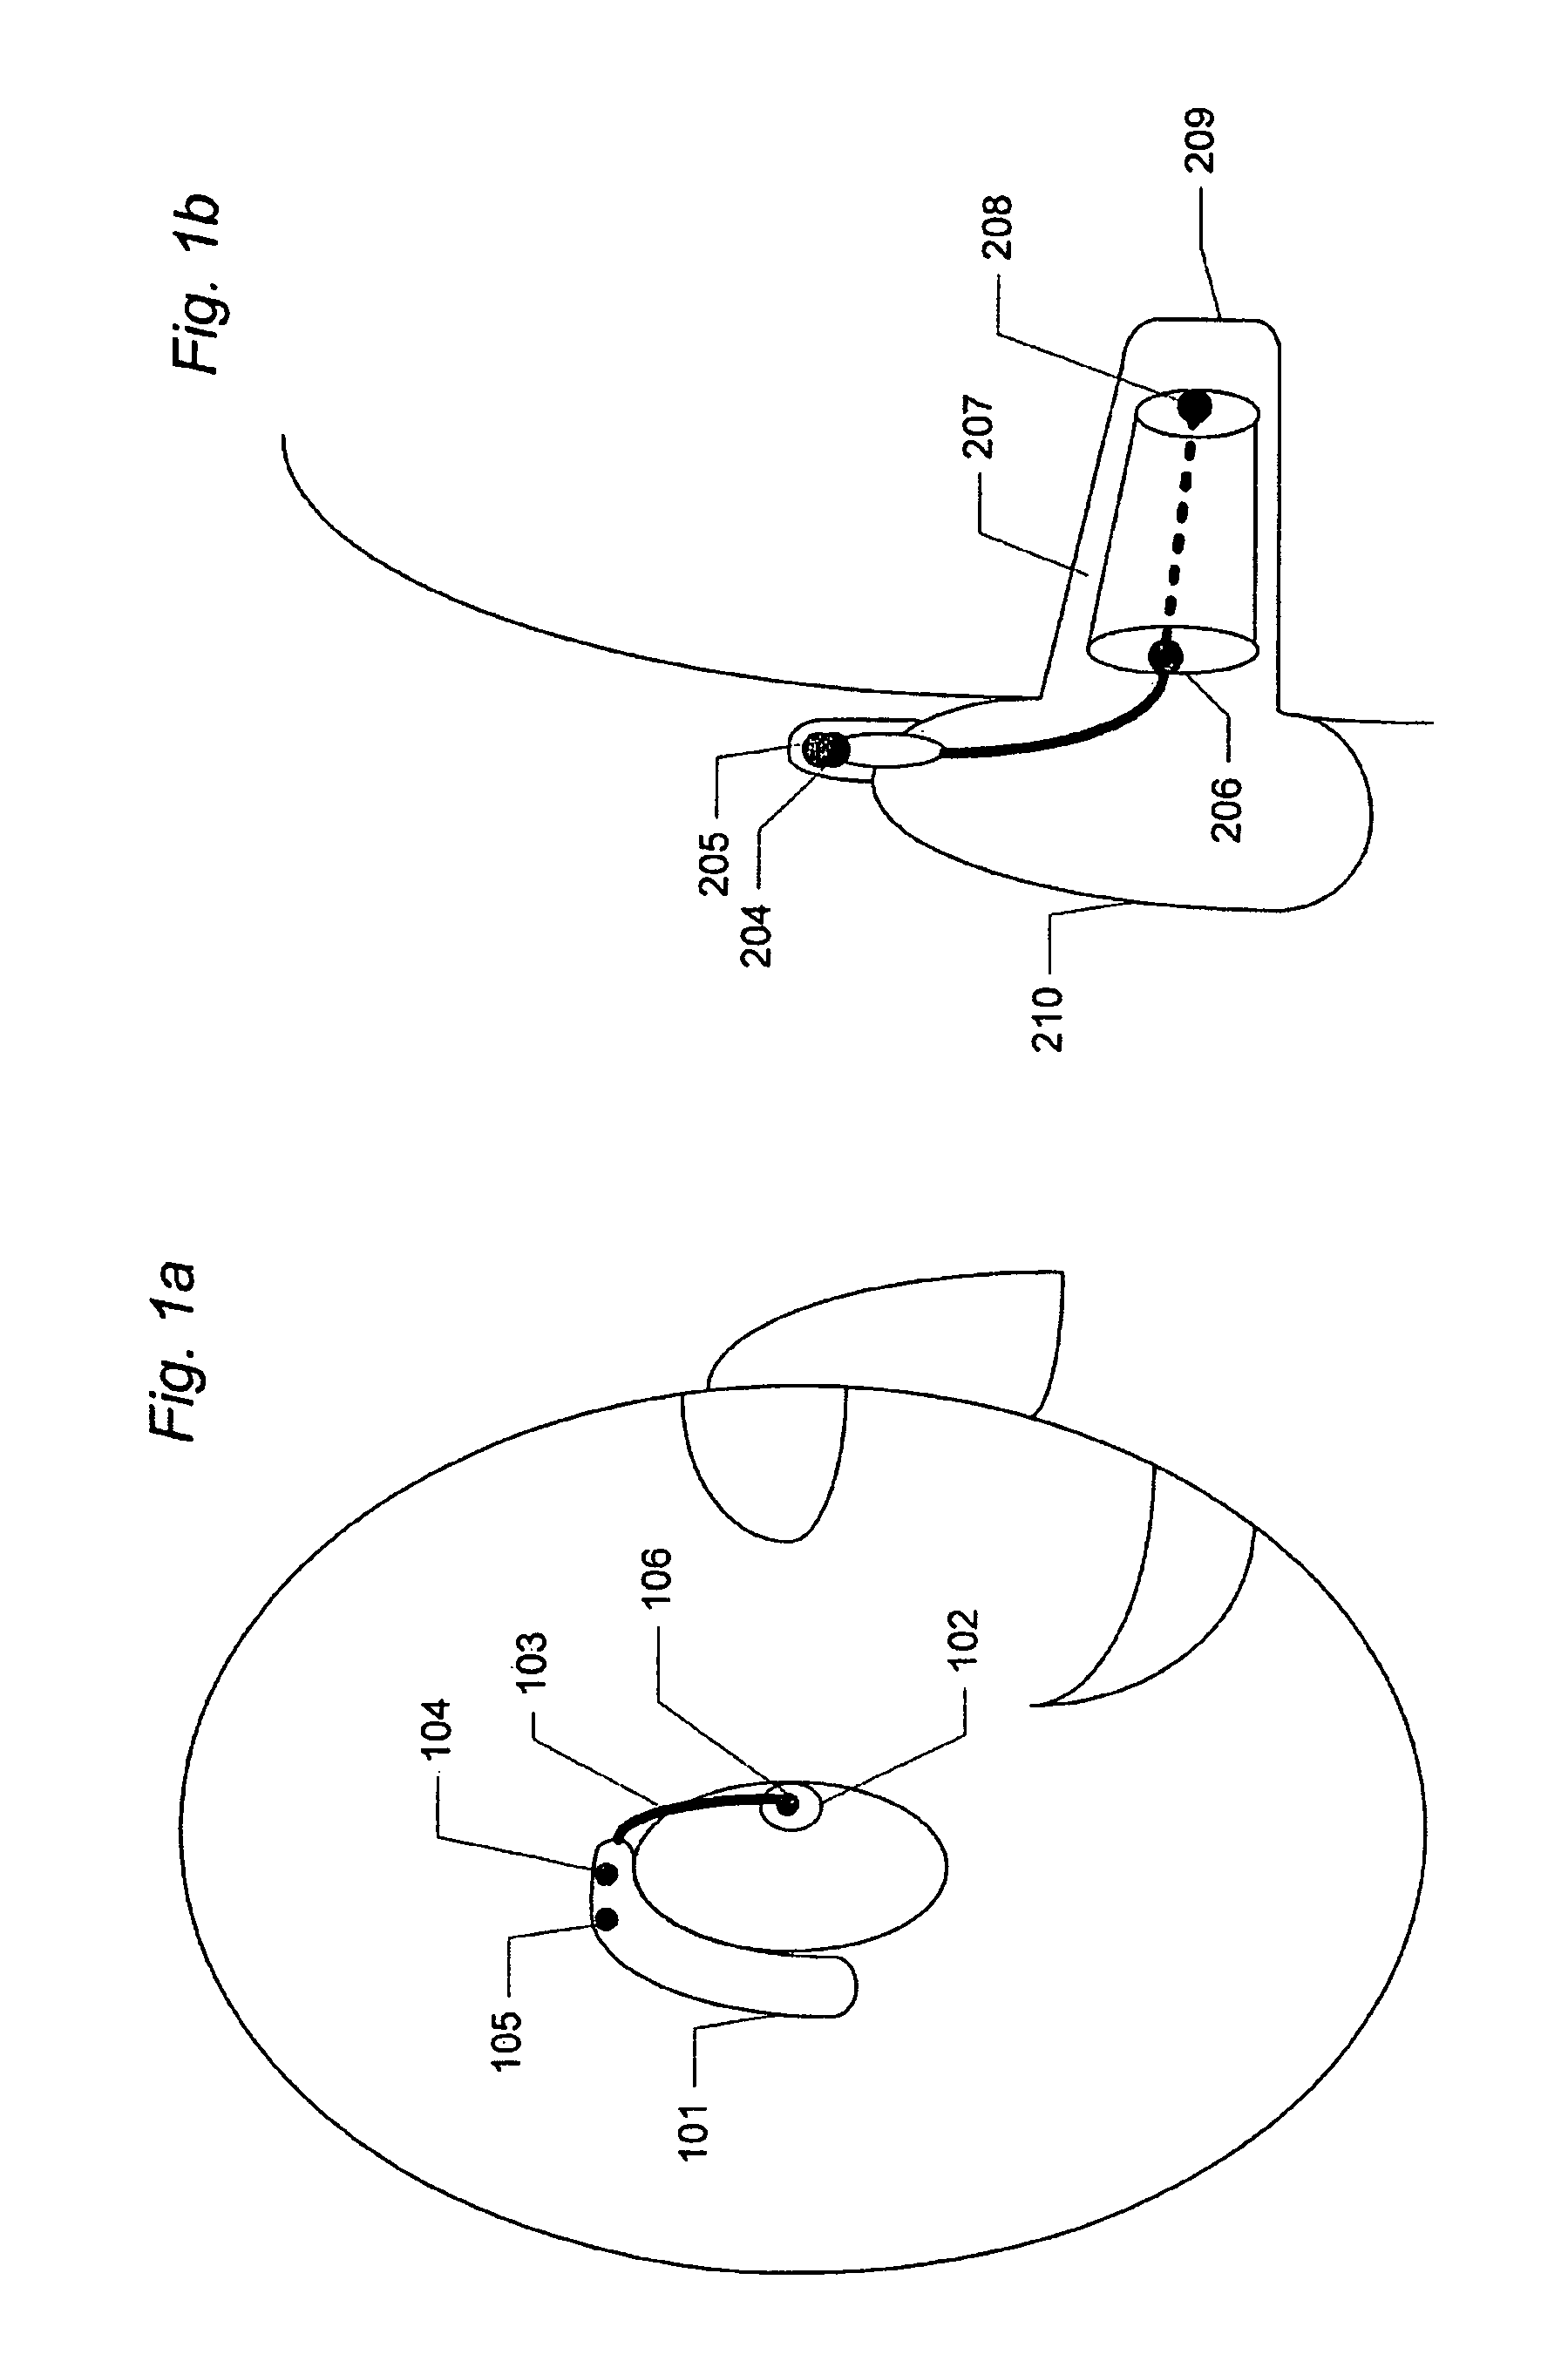 Method of estimating weighting function of audio signals in a hearing aid